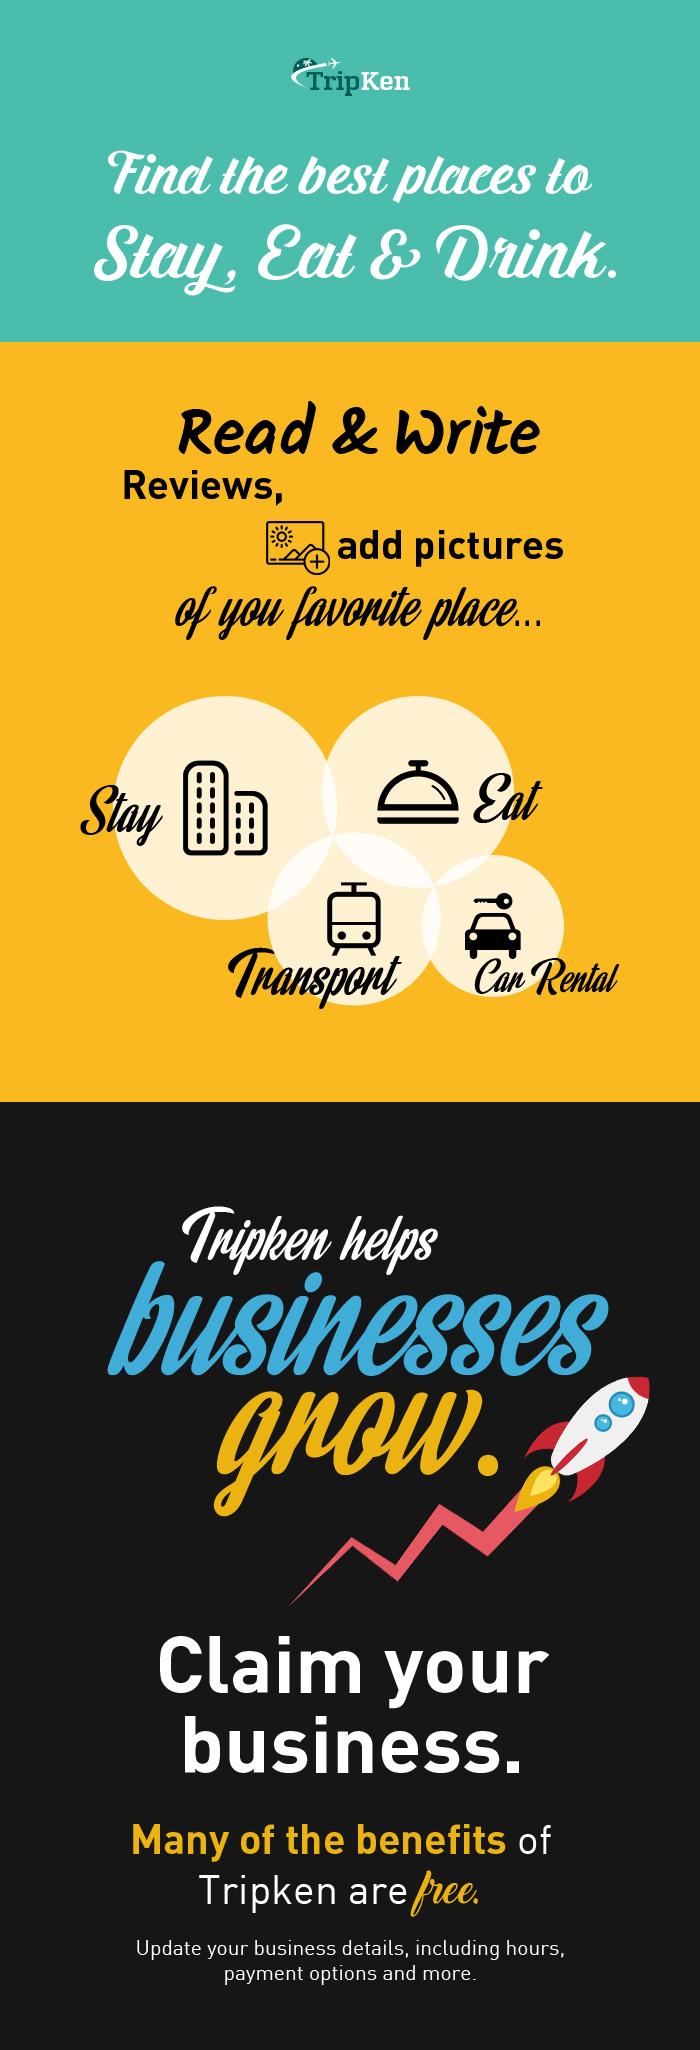 Find the Best Places to Stay, Eat & Drink at TripKen